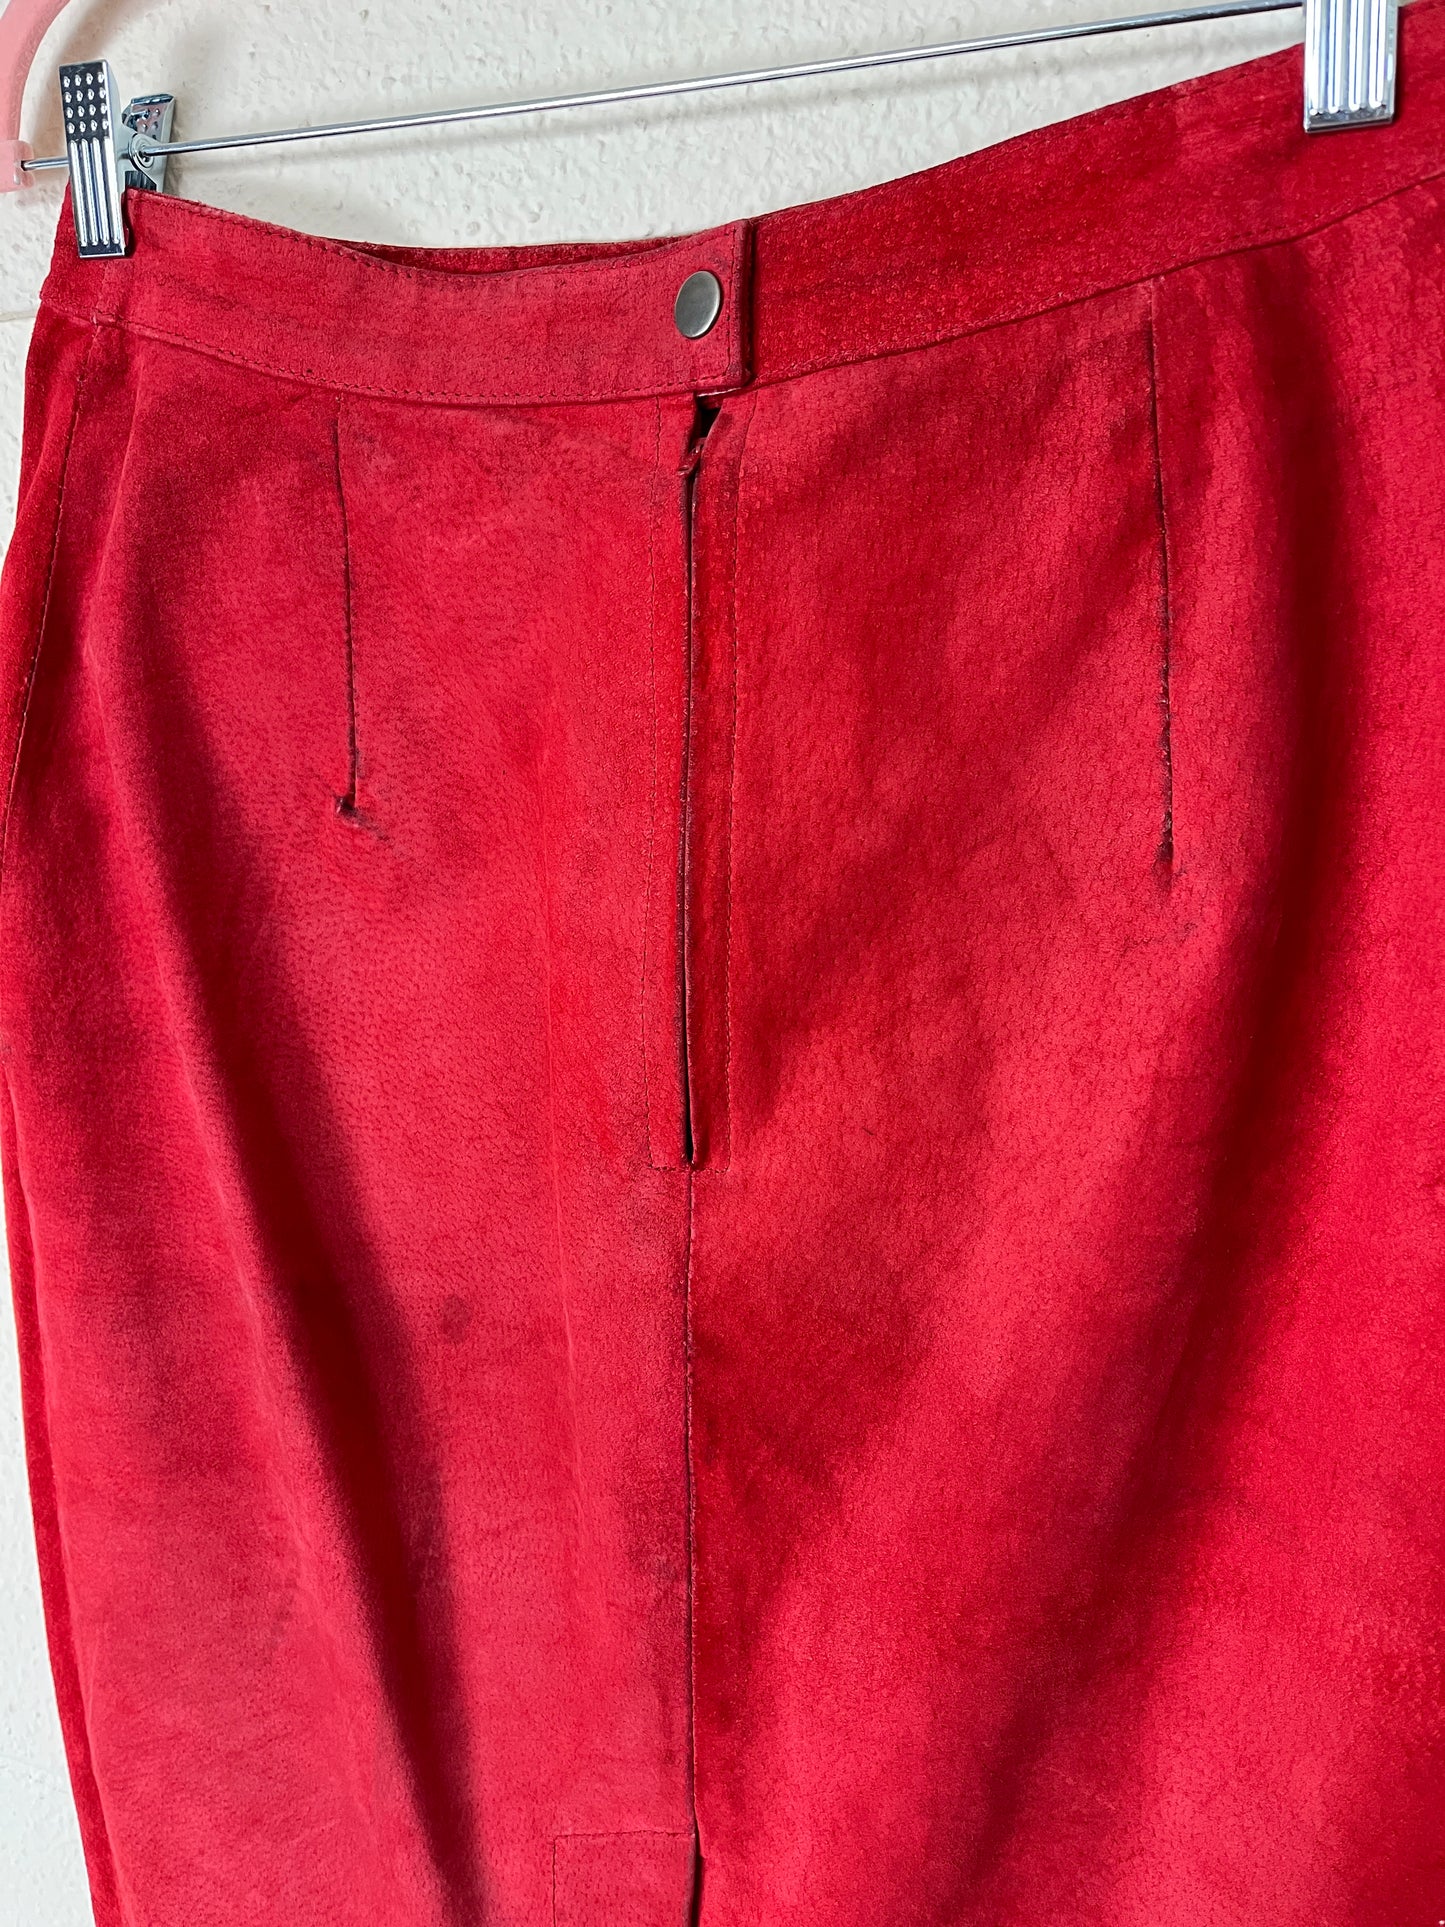 1980s G III CHERRY RED SUEDE SNAP BACK ZIP BACK SKIRT - size xs to small